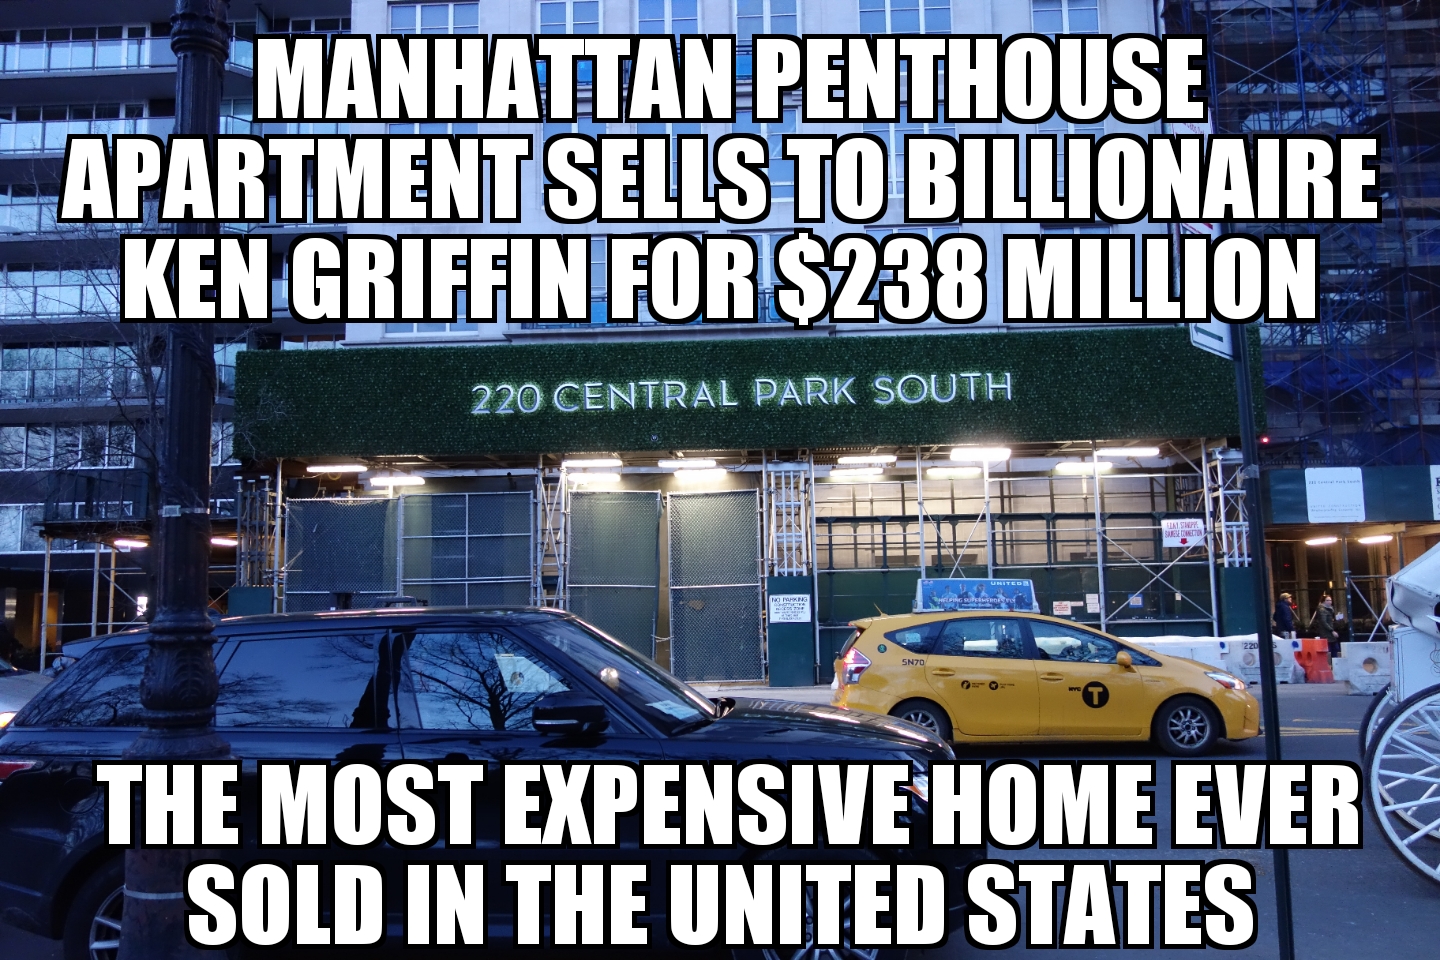 Ken Griffin buys Manhattan apartment for record $238M